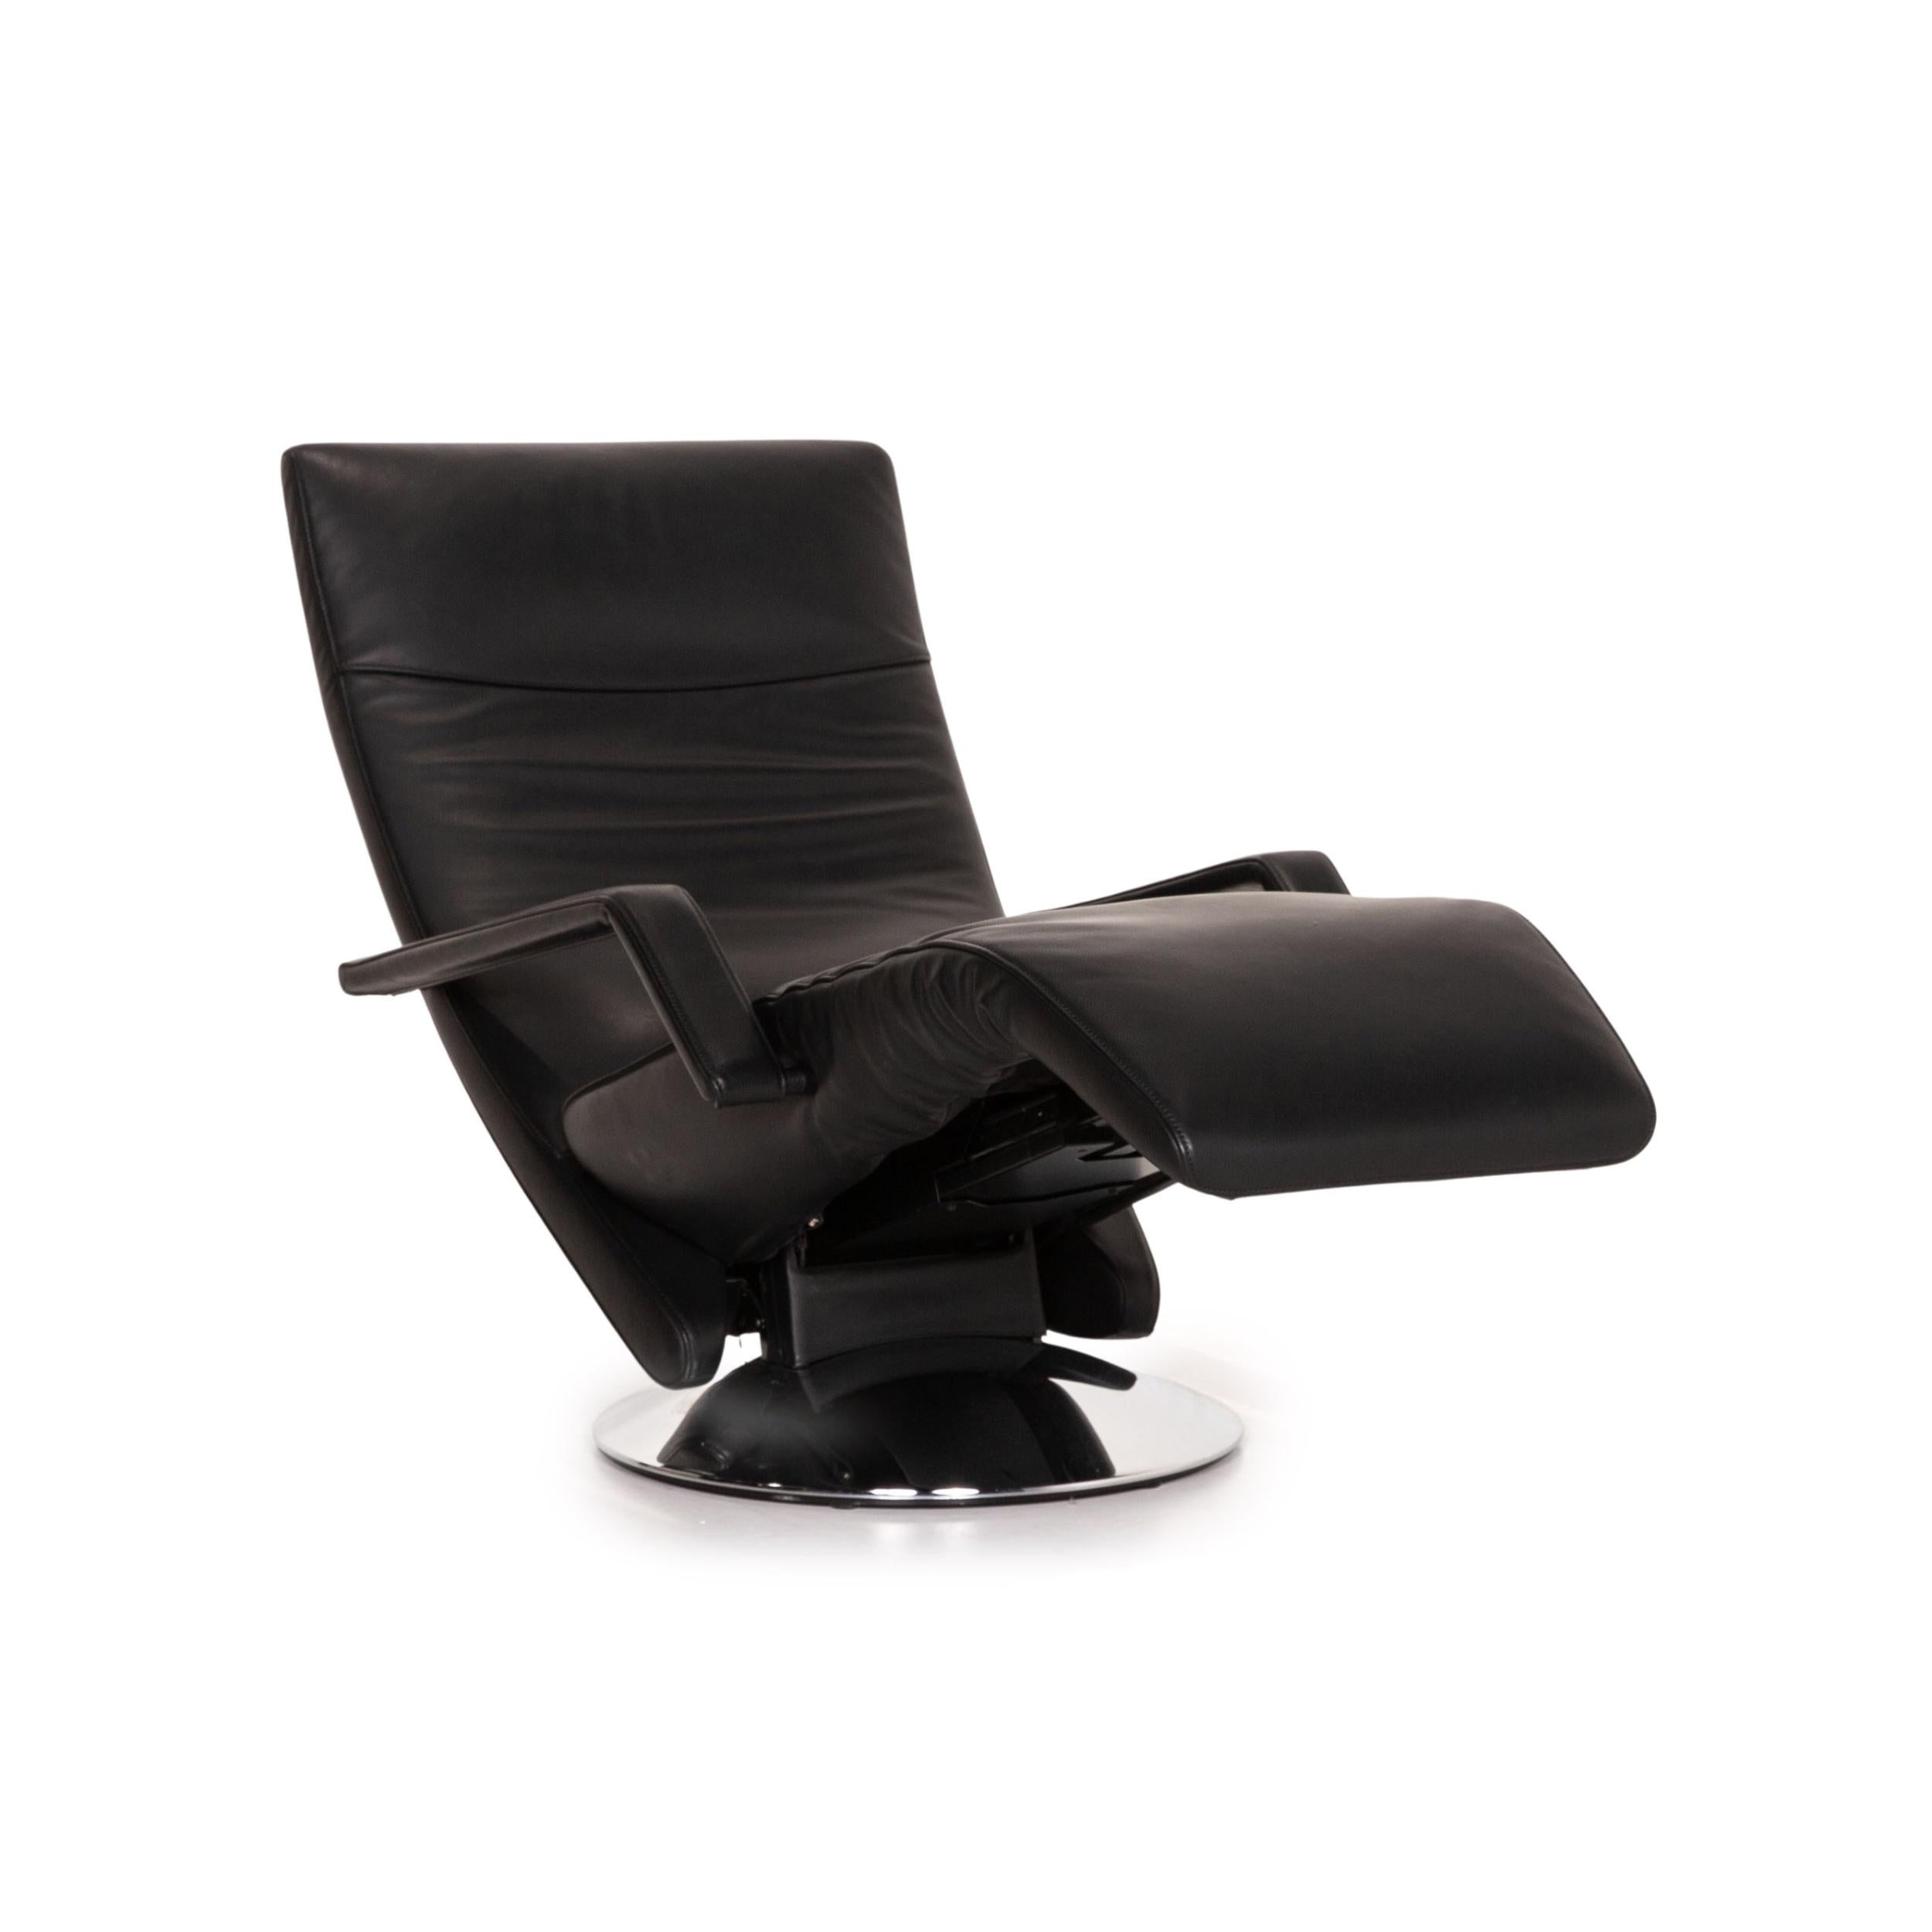 Modern Fsm Evolo Leather Armchair Black Electrical Function Relax Function Recliner